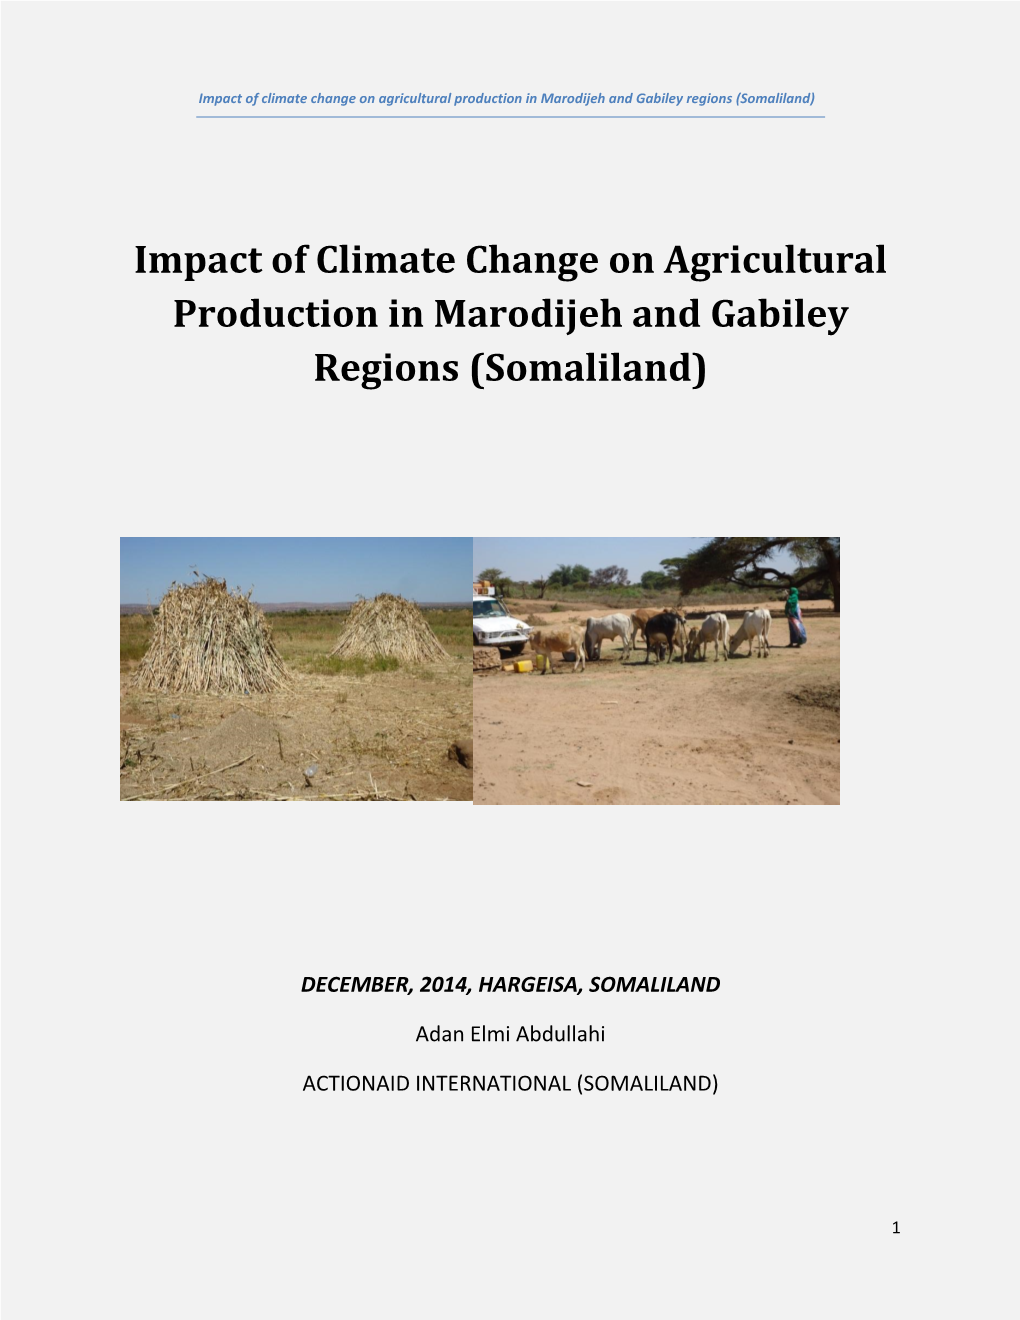 Impact of Imported Food/Food Aid on Local Markets in Gabiley Region